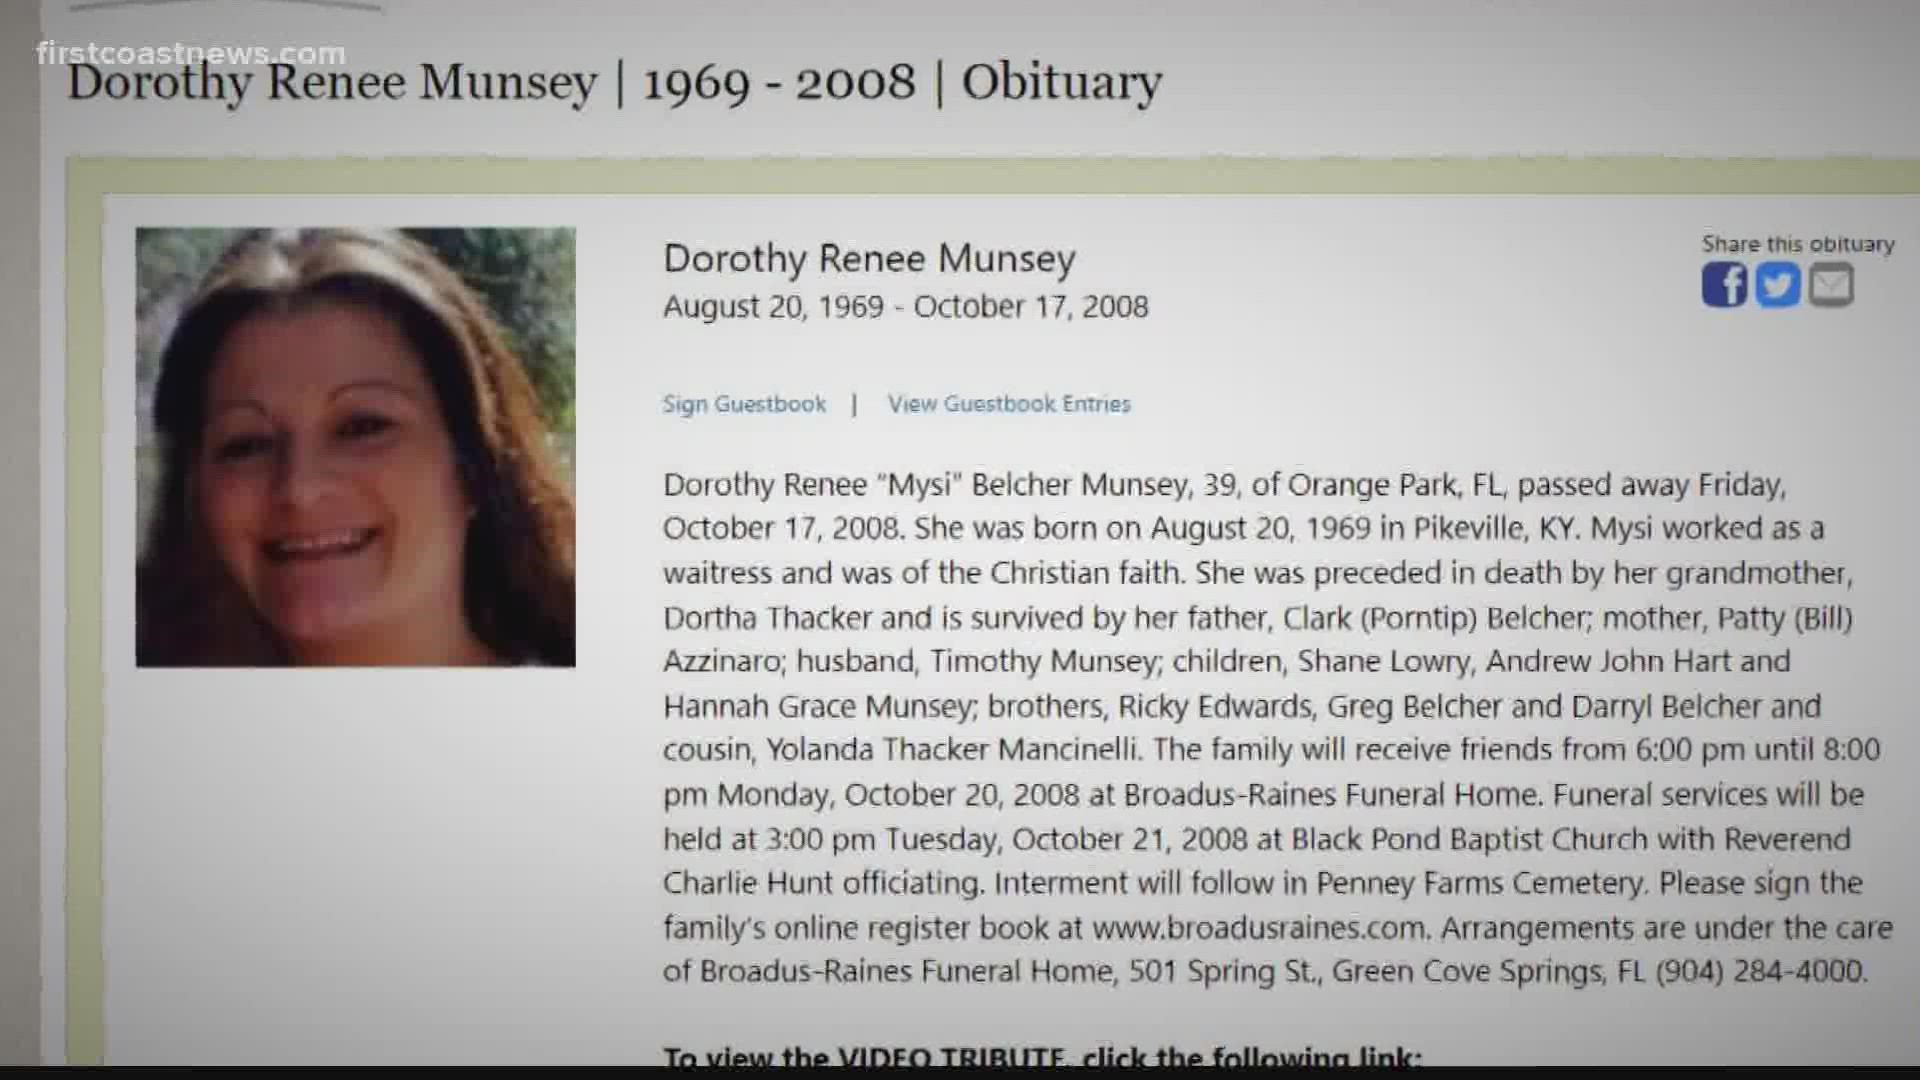 There are many questions about what happened to Dorothy Renee Munsey on the morning of October 17, 2008. Most importantly, who pulled the trigger ending her life?